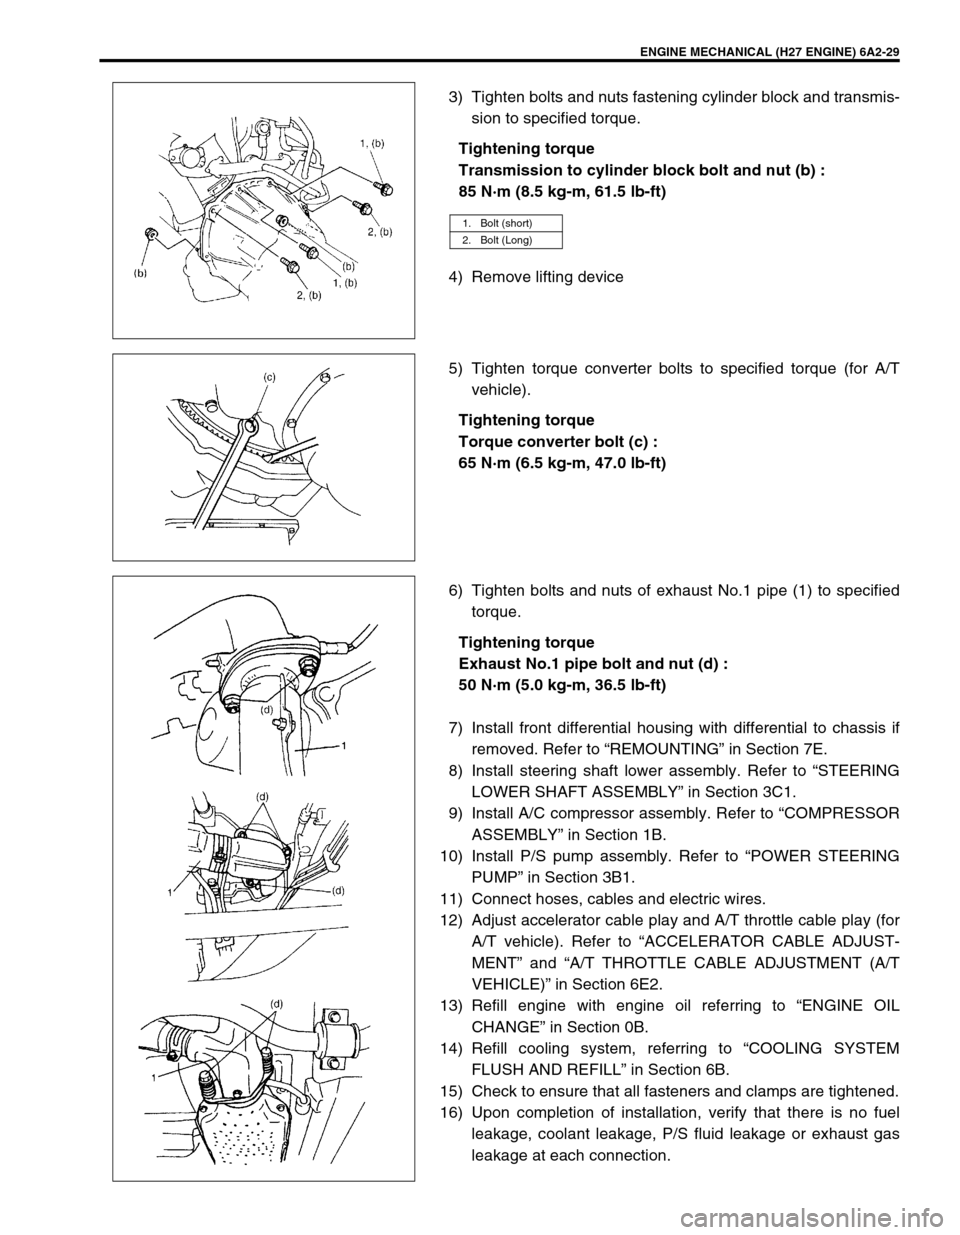 SUZUKI GRAND VITARA 1999 2.G Owners Manual ENGINE MECHANICAL (H27 ENGINE) 6A2-29
3) Tighten bolts and nuts fastening cylinder block and transmis-
sion to specified torque.
Tightening torque
Transmission to cylinder block bolt and nut (b) :
85 